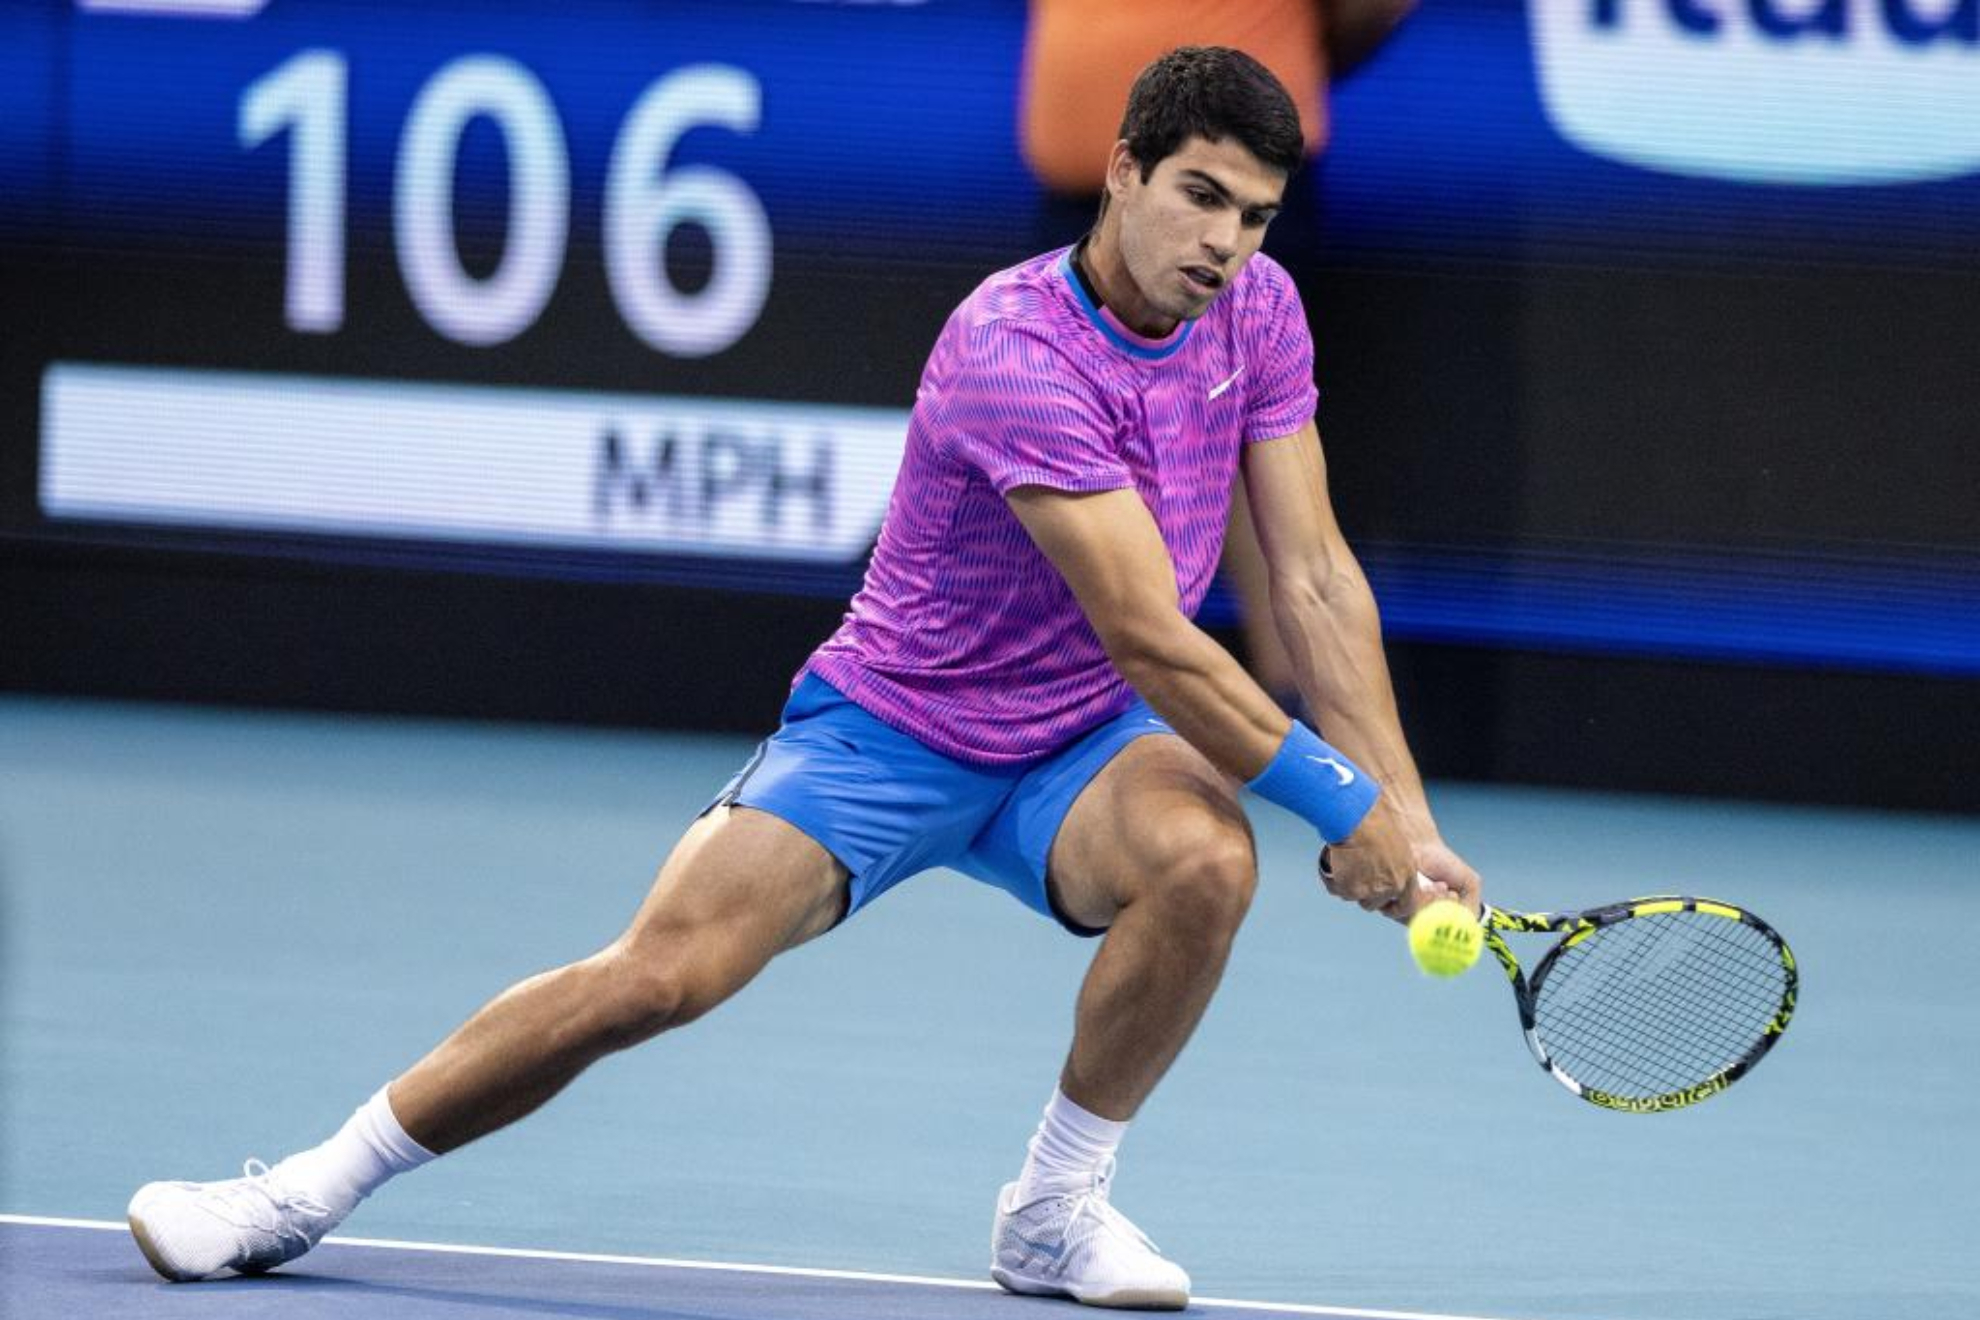 Carlos Alcaraz during his match against Monfils at the Miami Masters 1000.